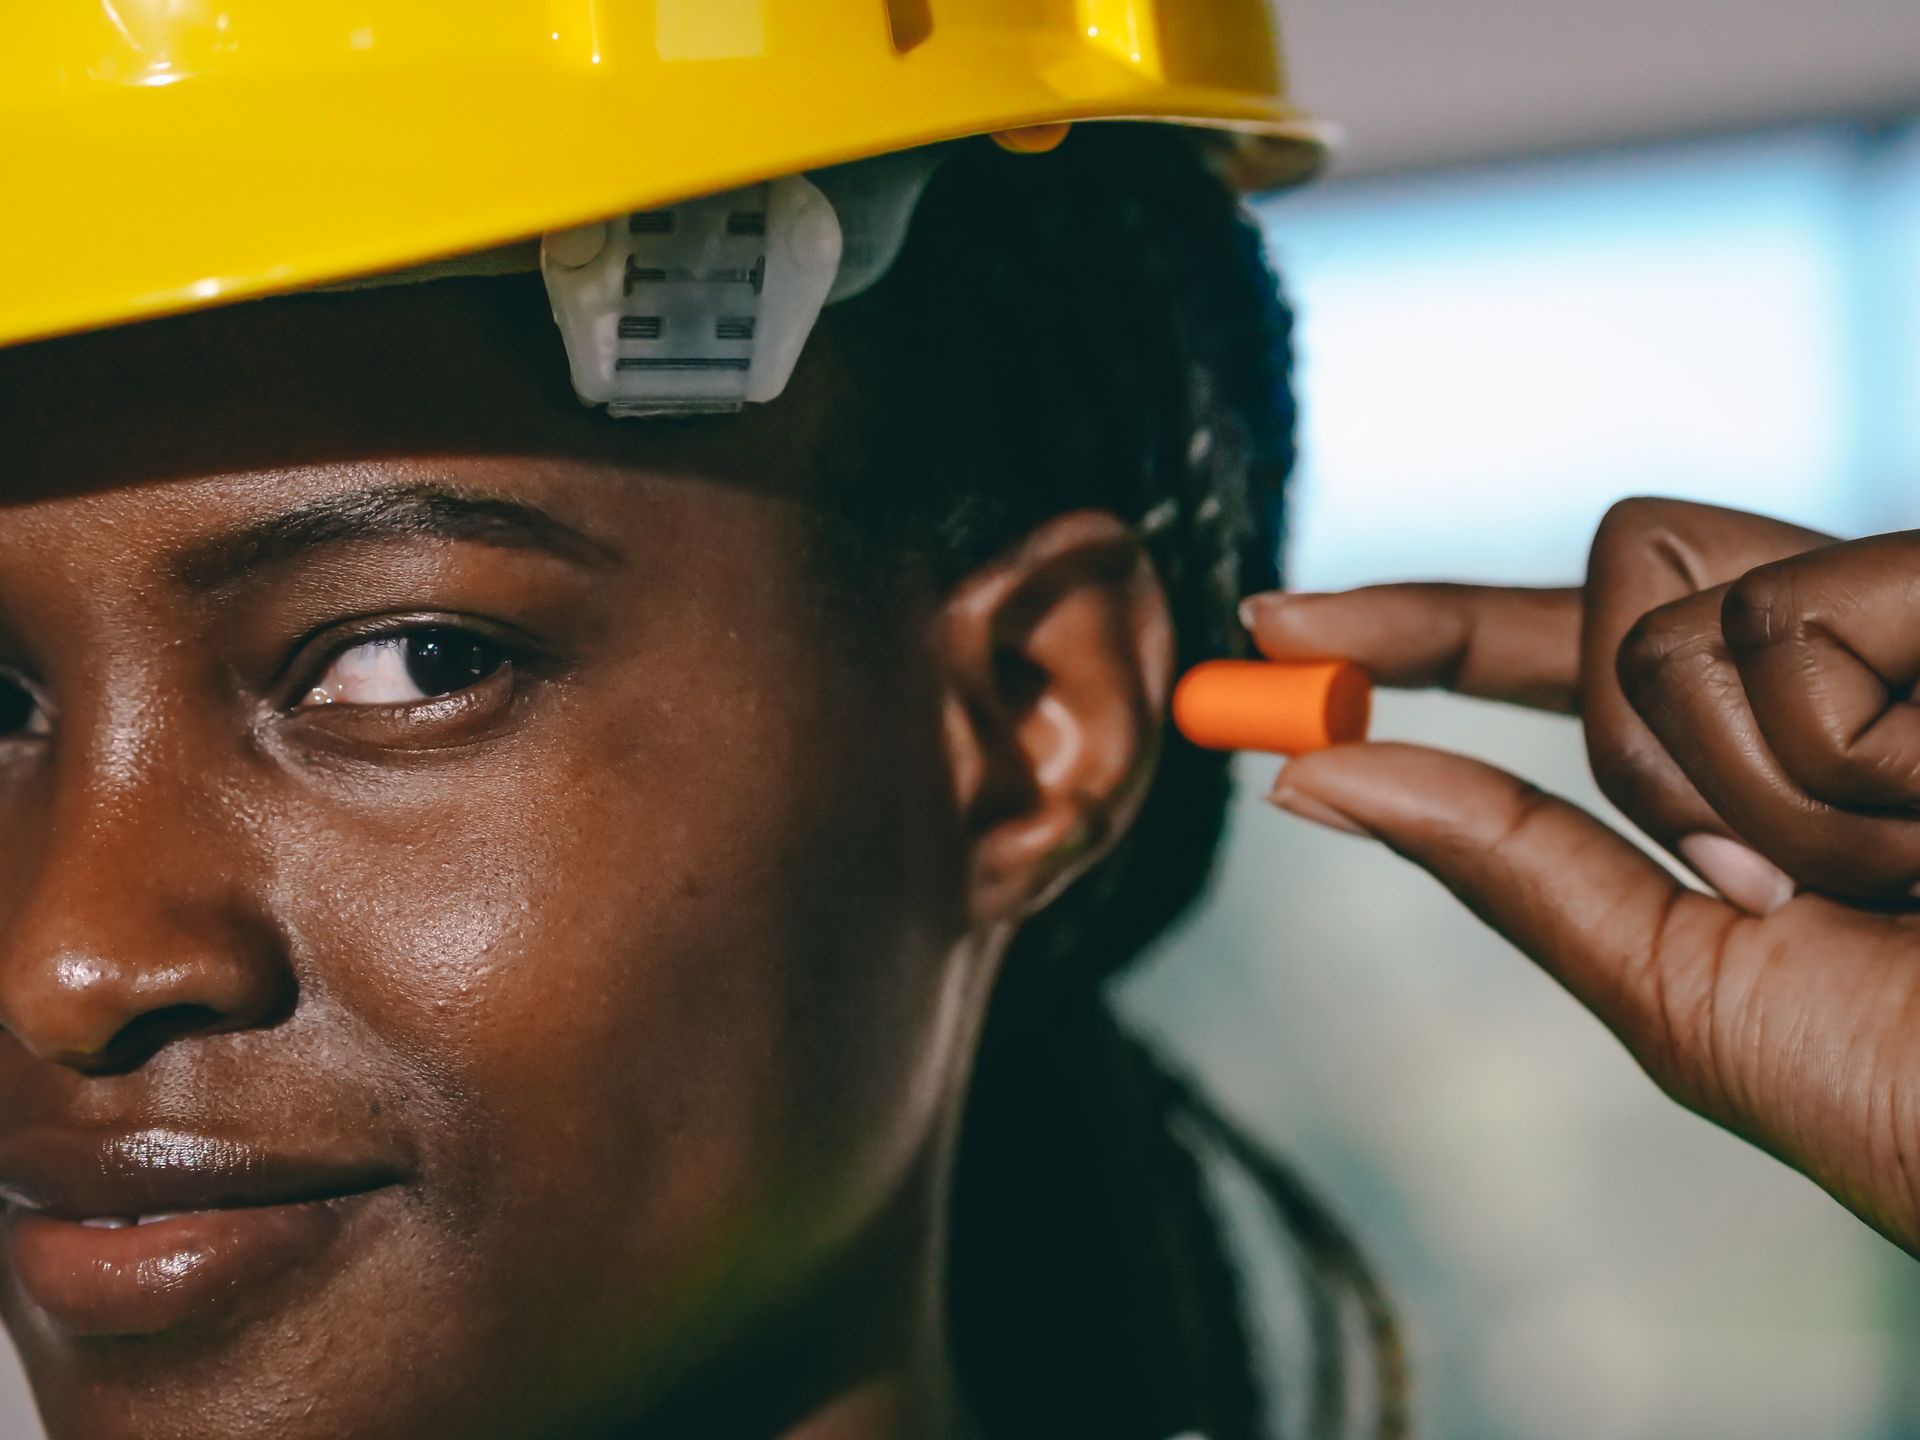 A woman wearing a hard hat and ear plugs